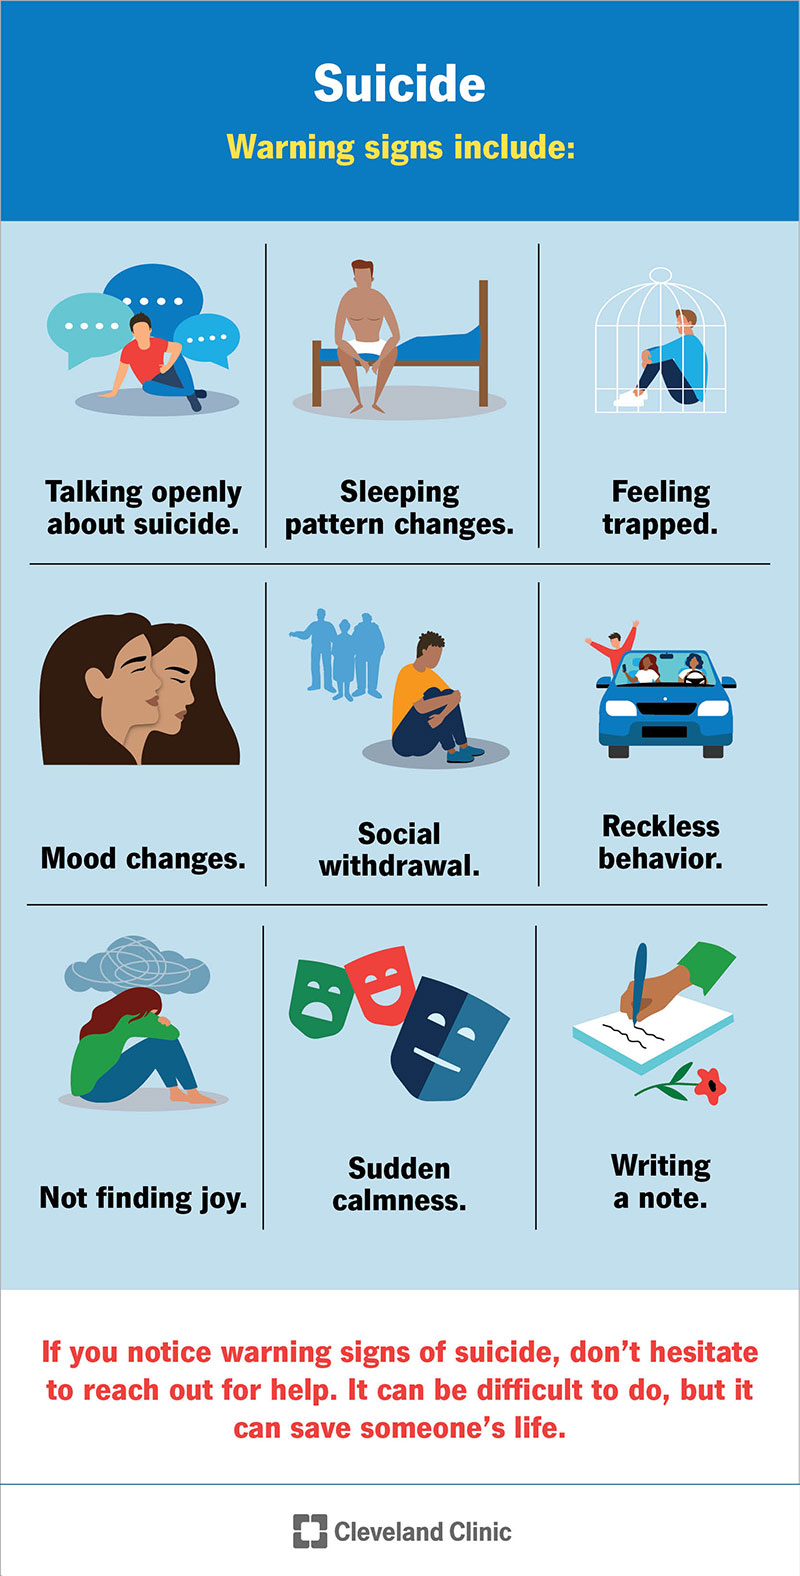 Nine common warning signs of suicide, including social withdrawal, reckless behavior and talking openly about suicide